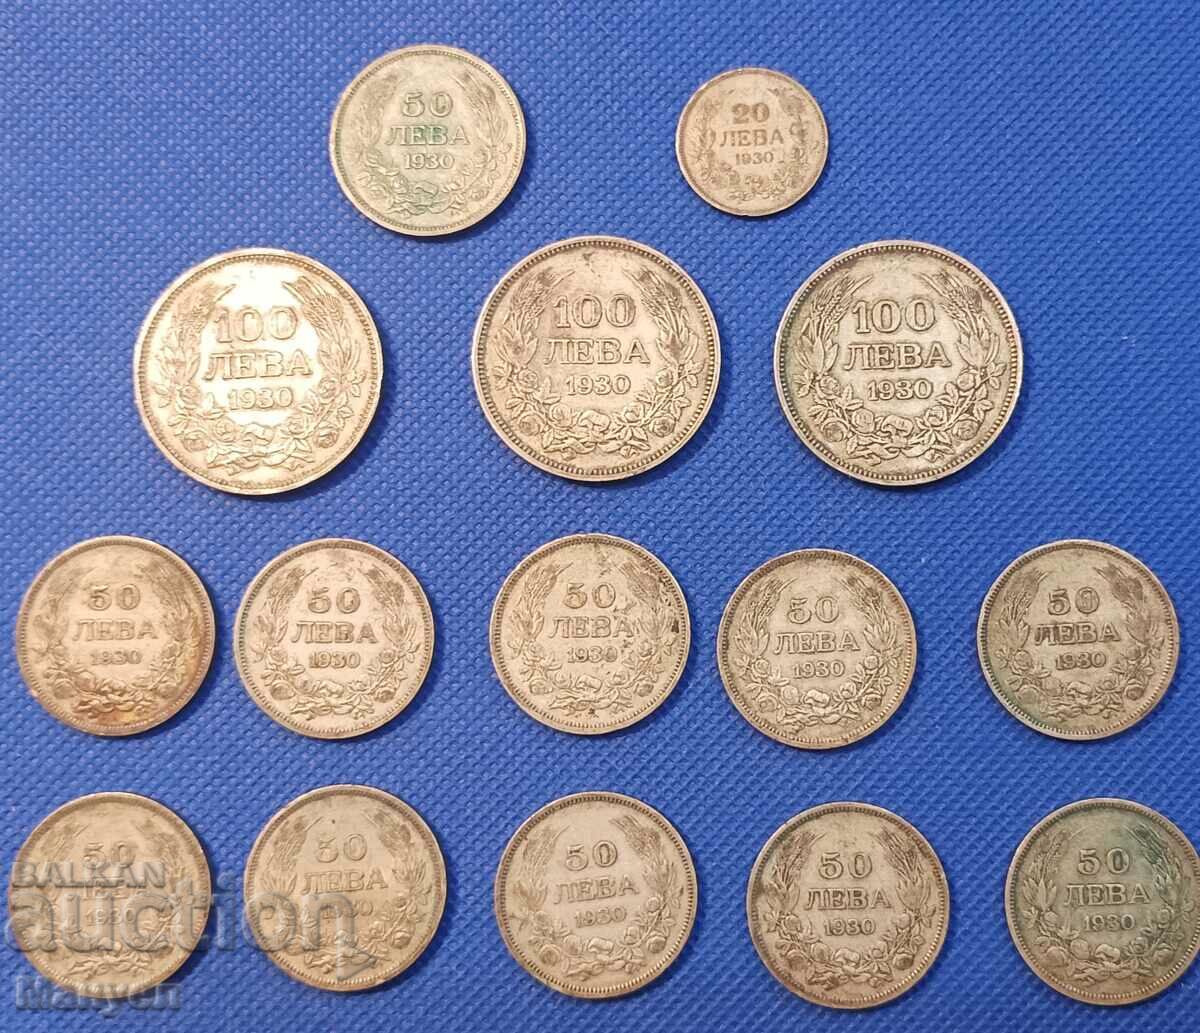 Lot of Silver Royal Coins.